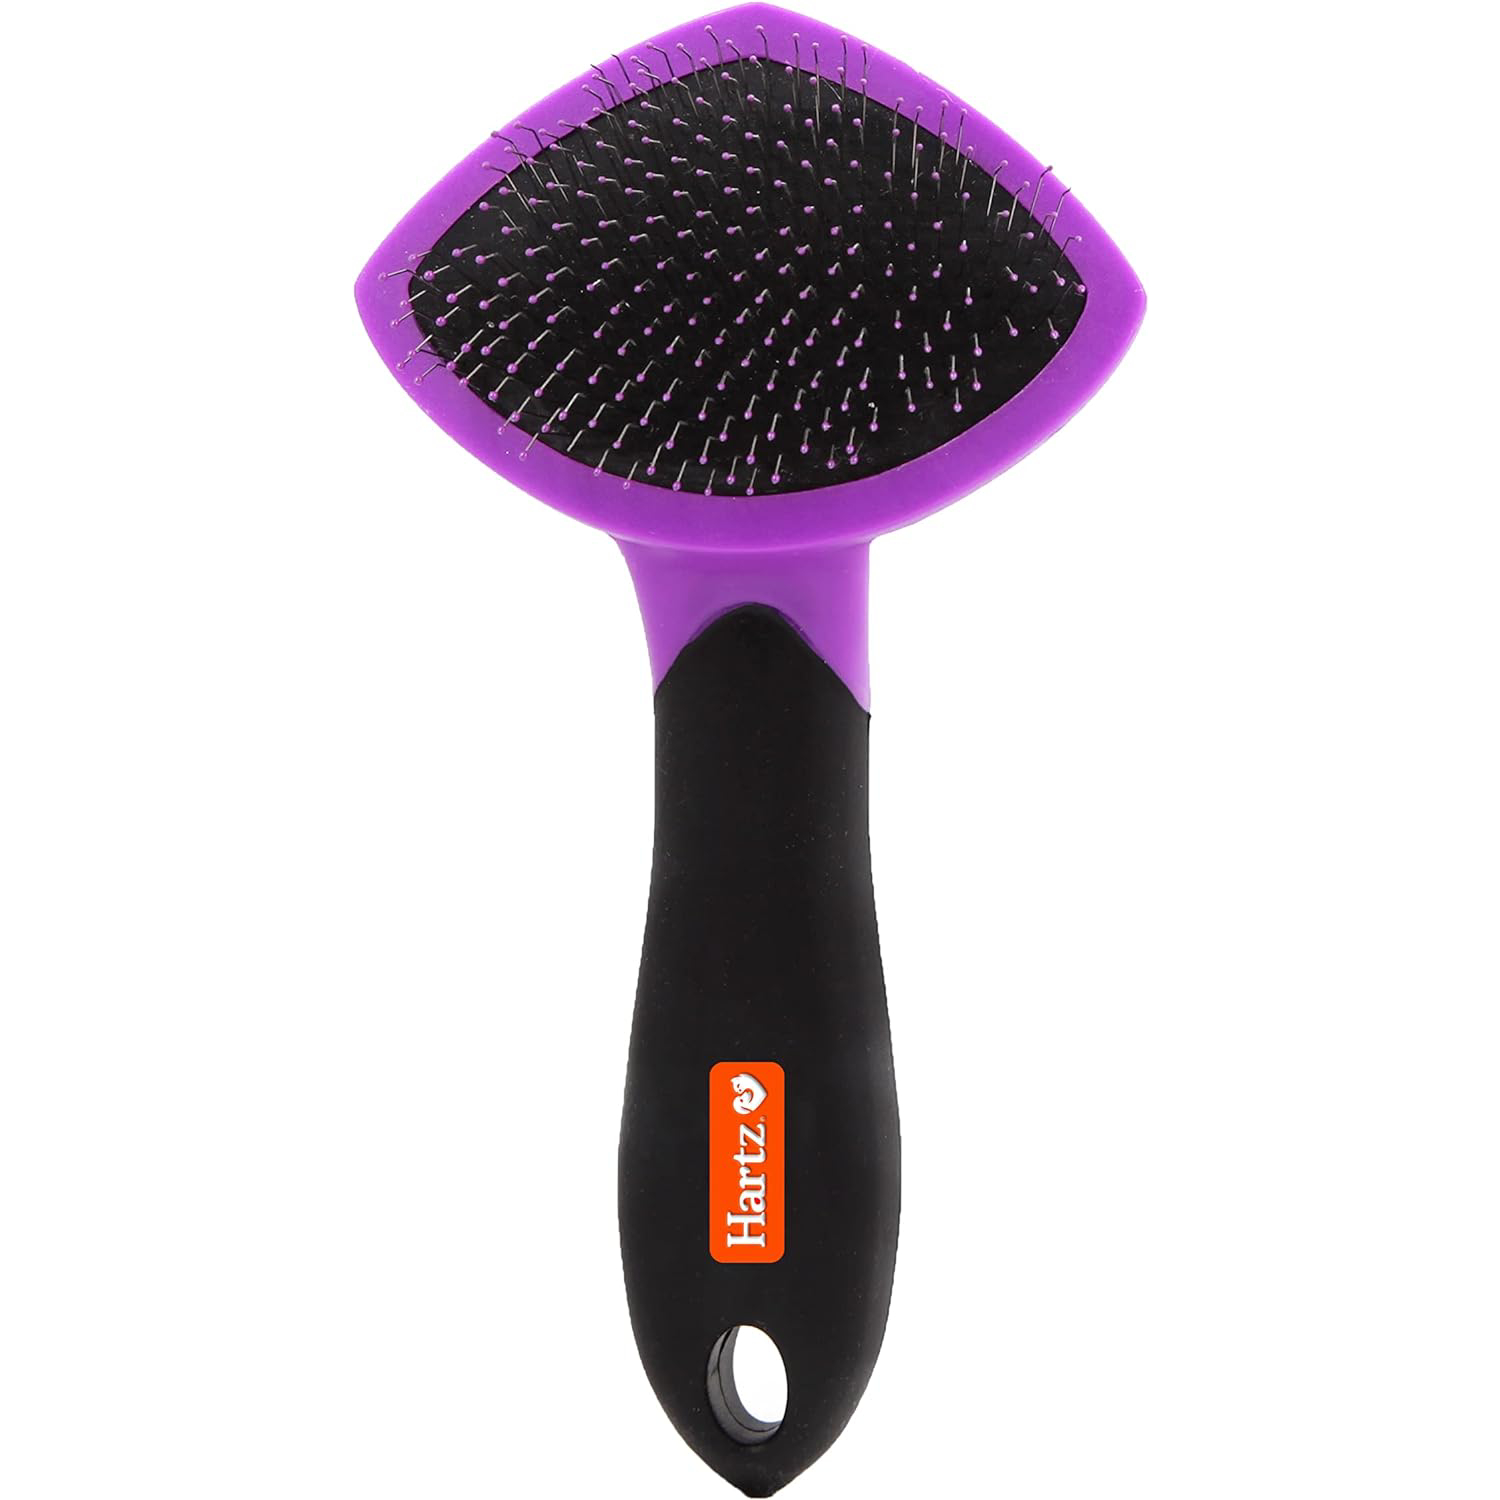 HARTZ, Groomer_s Best Small Slicker Brush for Cats and Small Dogs, Black_Violet, 1 Count new